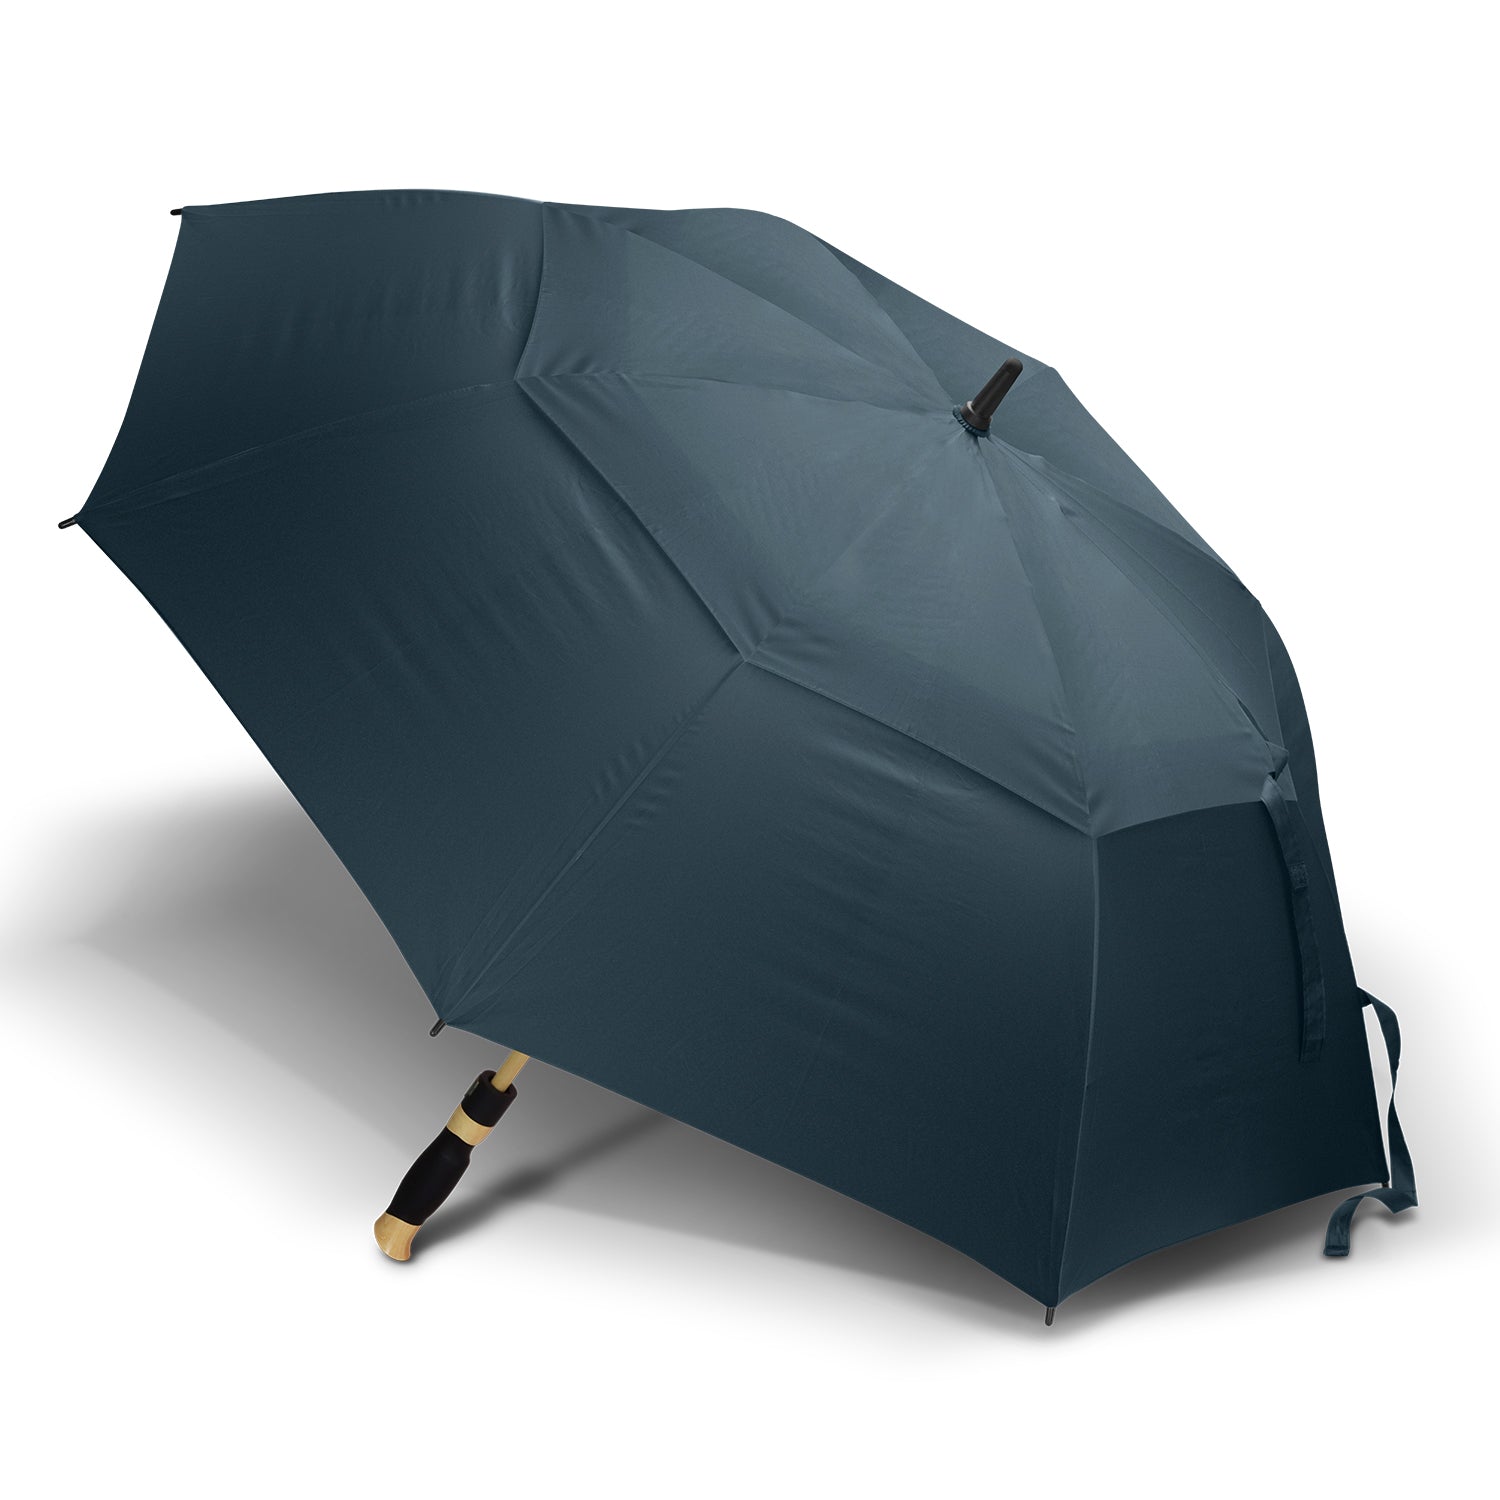 STORMPROOF CYCLONE XL®️ - Heavy Duty Storm Umbrella With Double Layer Wind Vent System, Wind Proof Fibreglass Frame - Auto-Open Push Button Feature